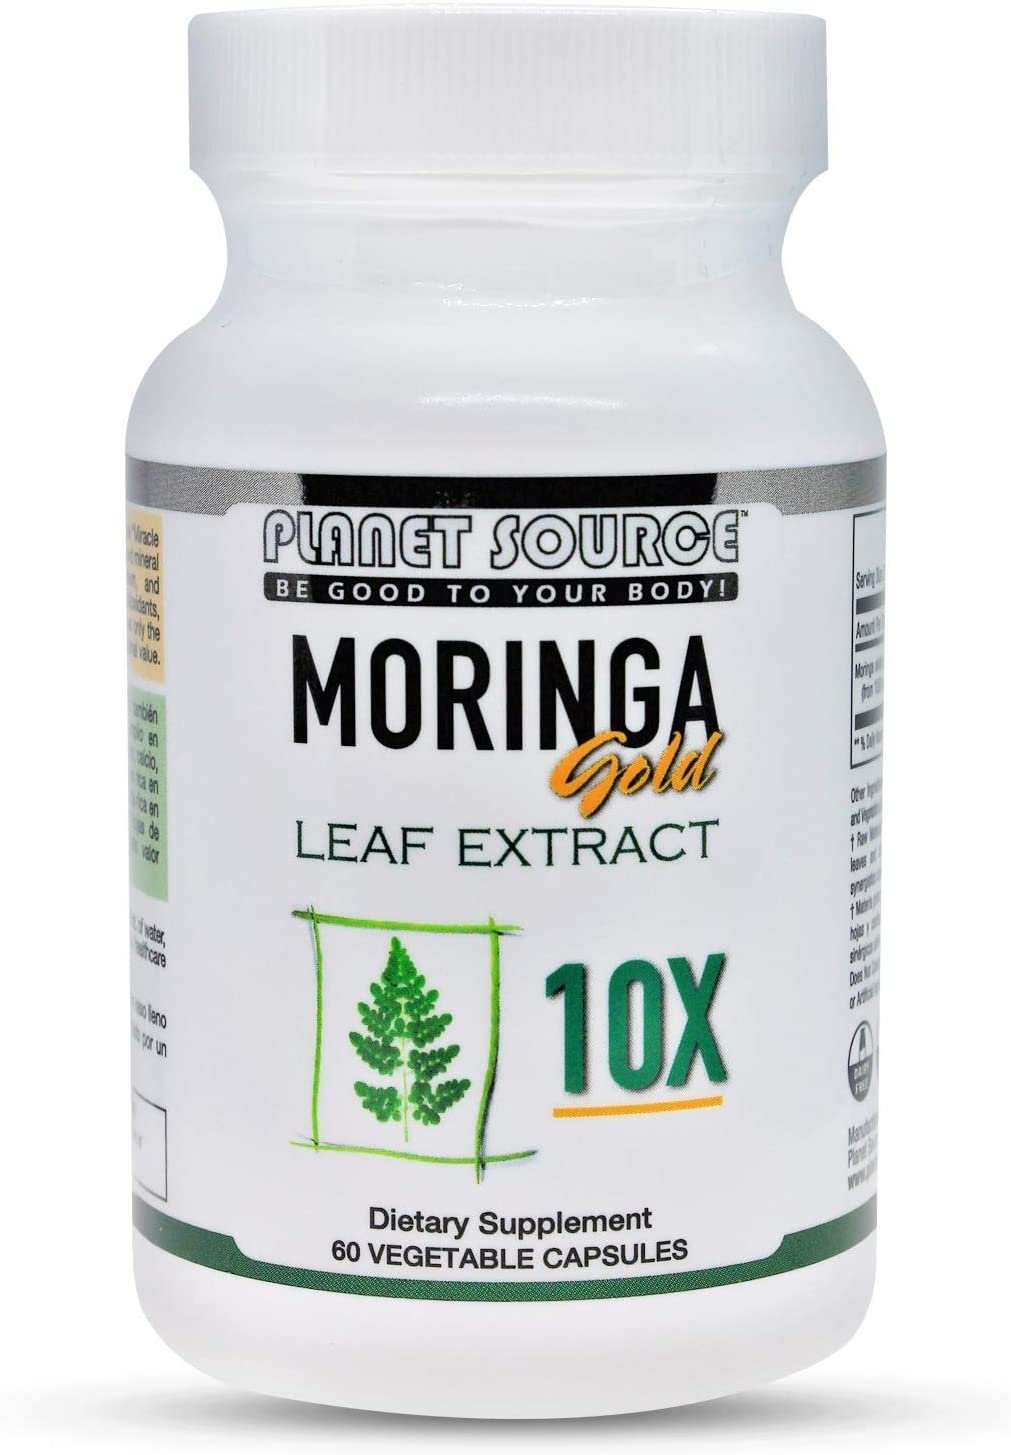 Planet Source Moringa Gold Extract 10,000mg Miracle Tree Vitamin A,B,C,D,E, and Minerals - Anti-oxidants - Supports Healthy Cholesterol and Weight Management - 60 10X Vegetable Capsules